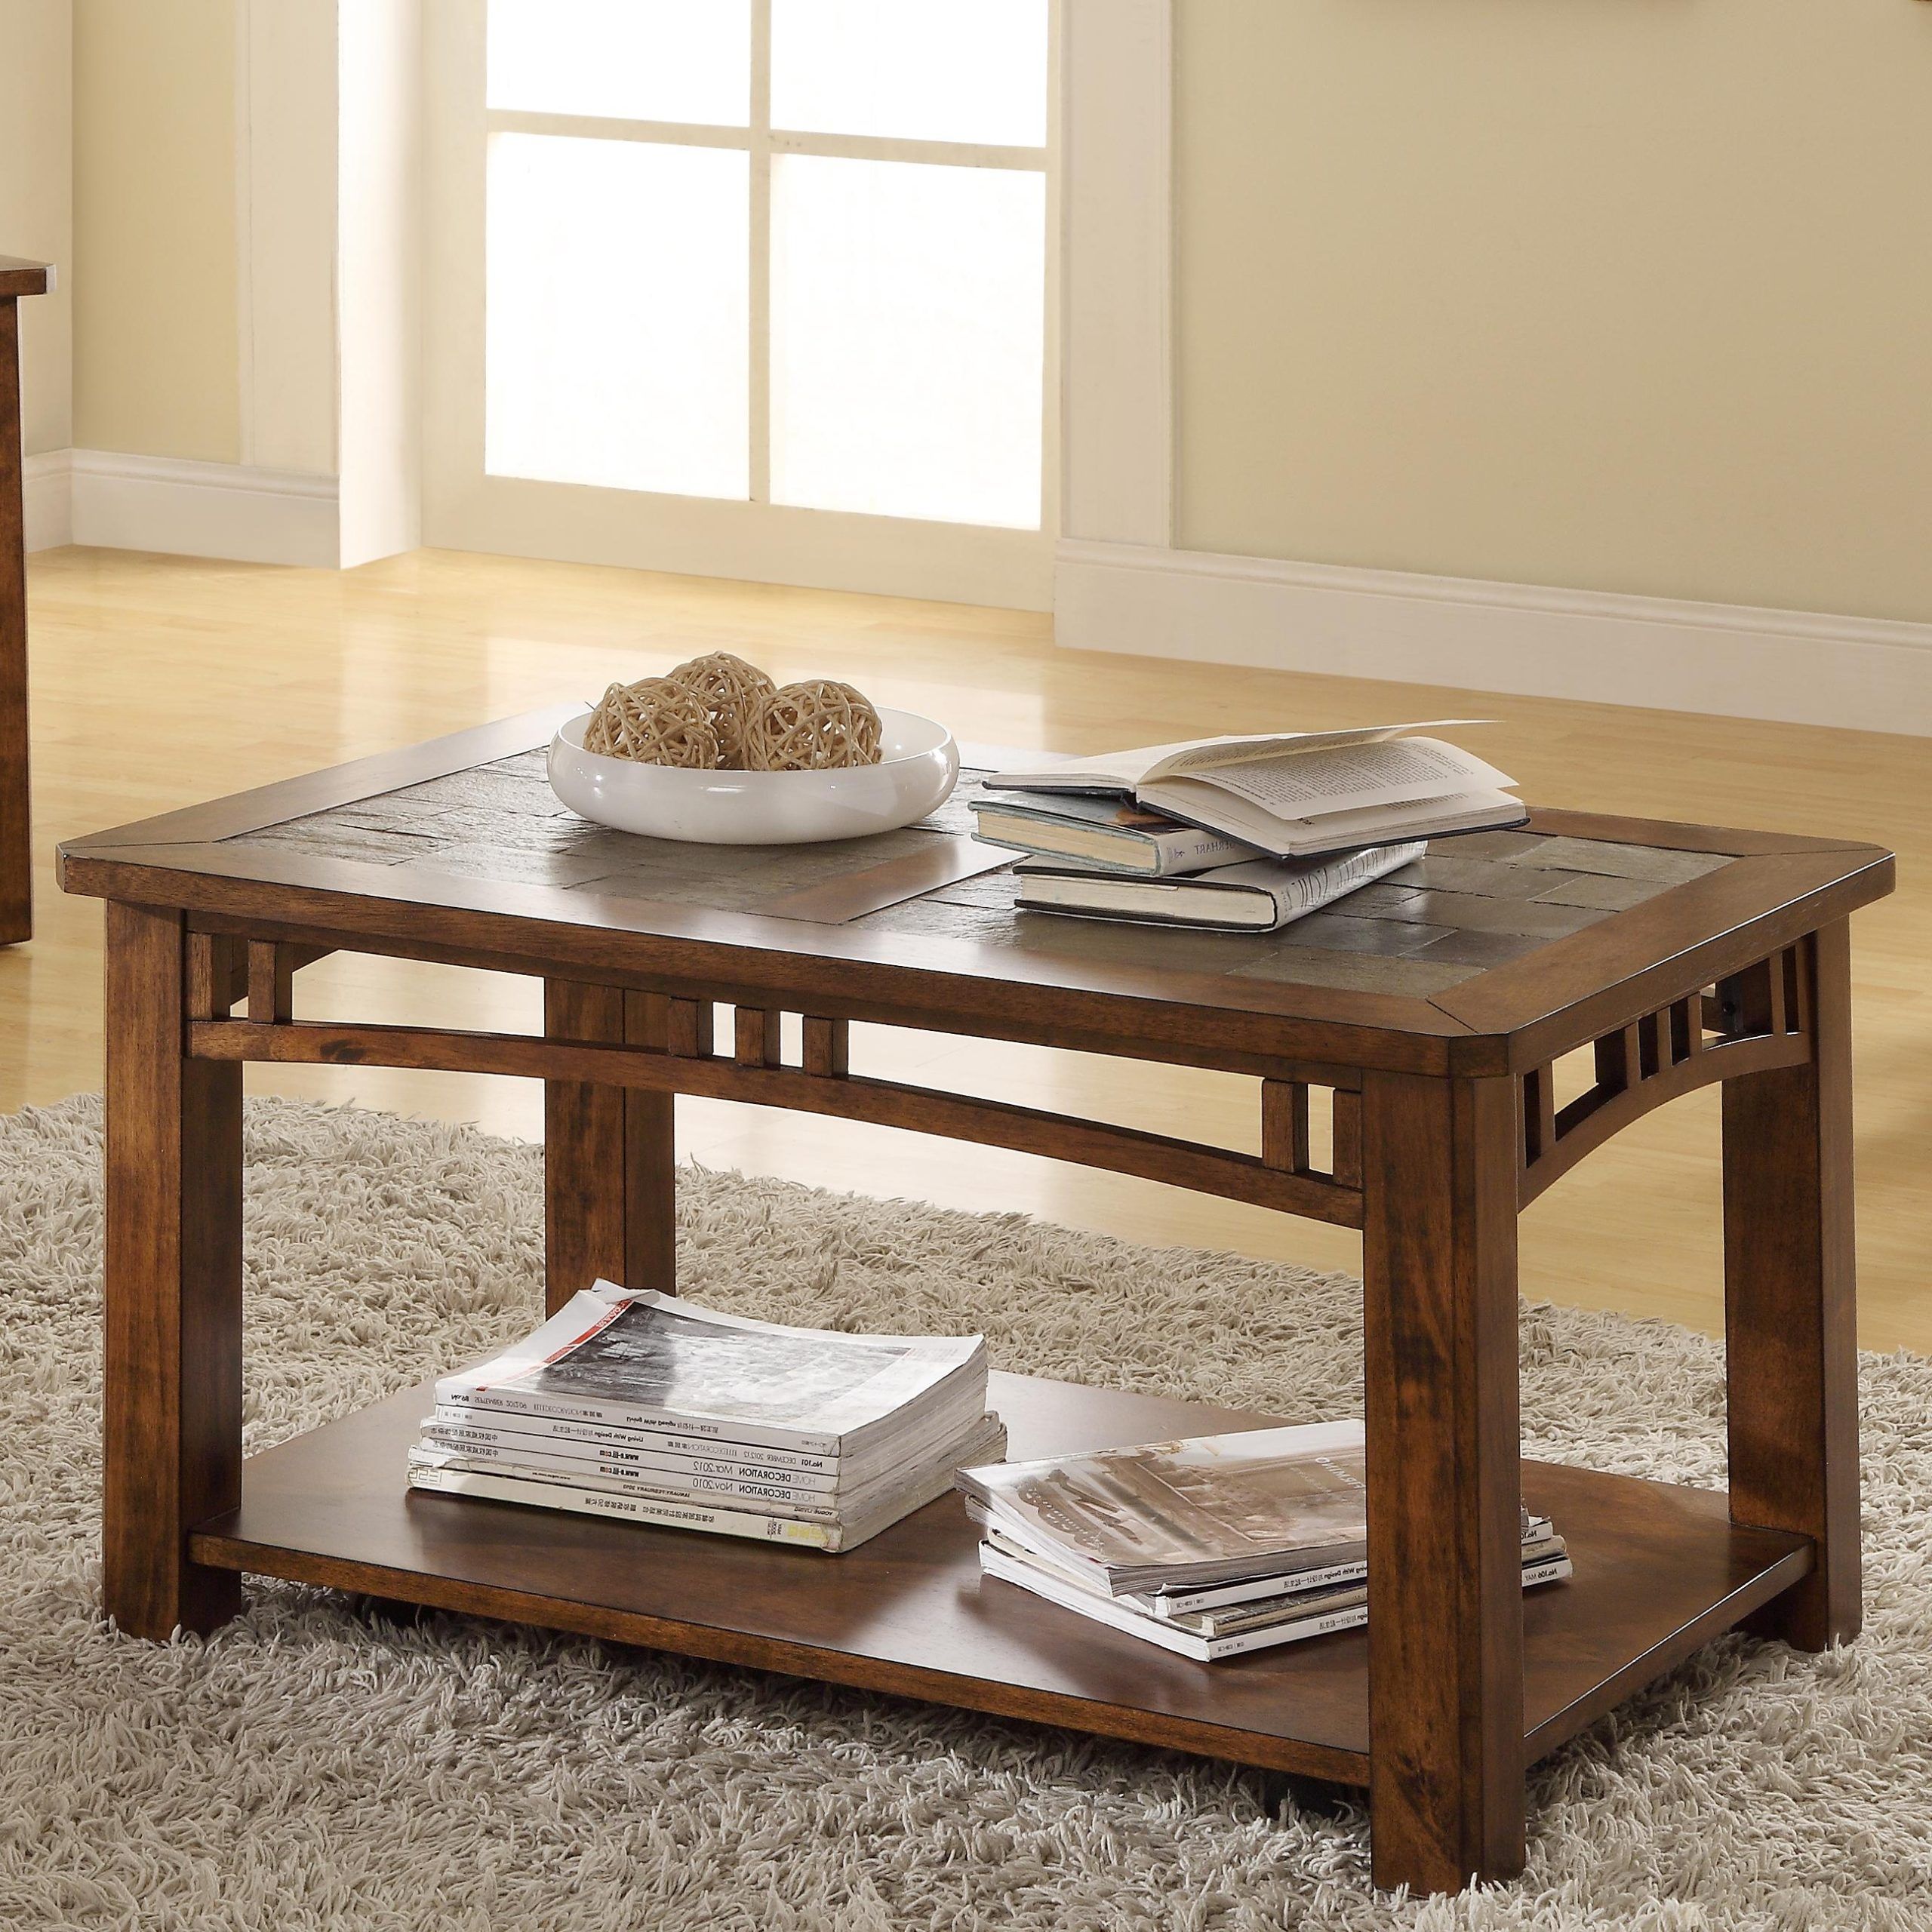 Value City Throughout Most Popular Coffee Tables With Casters (View 10 of 15)